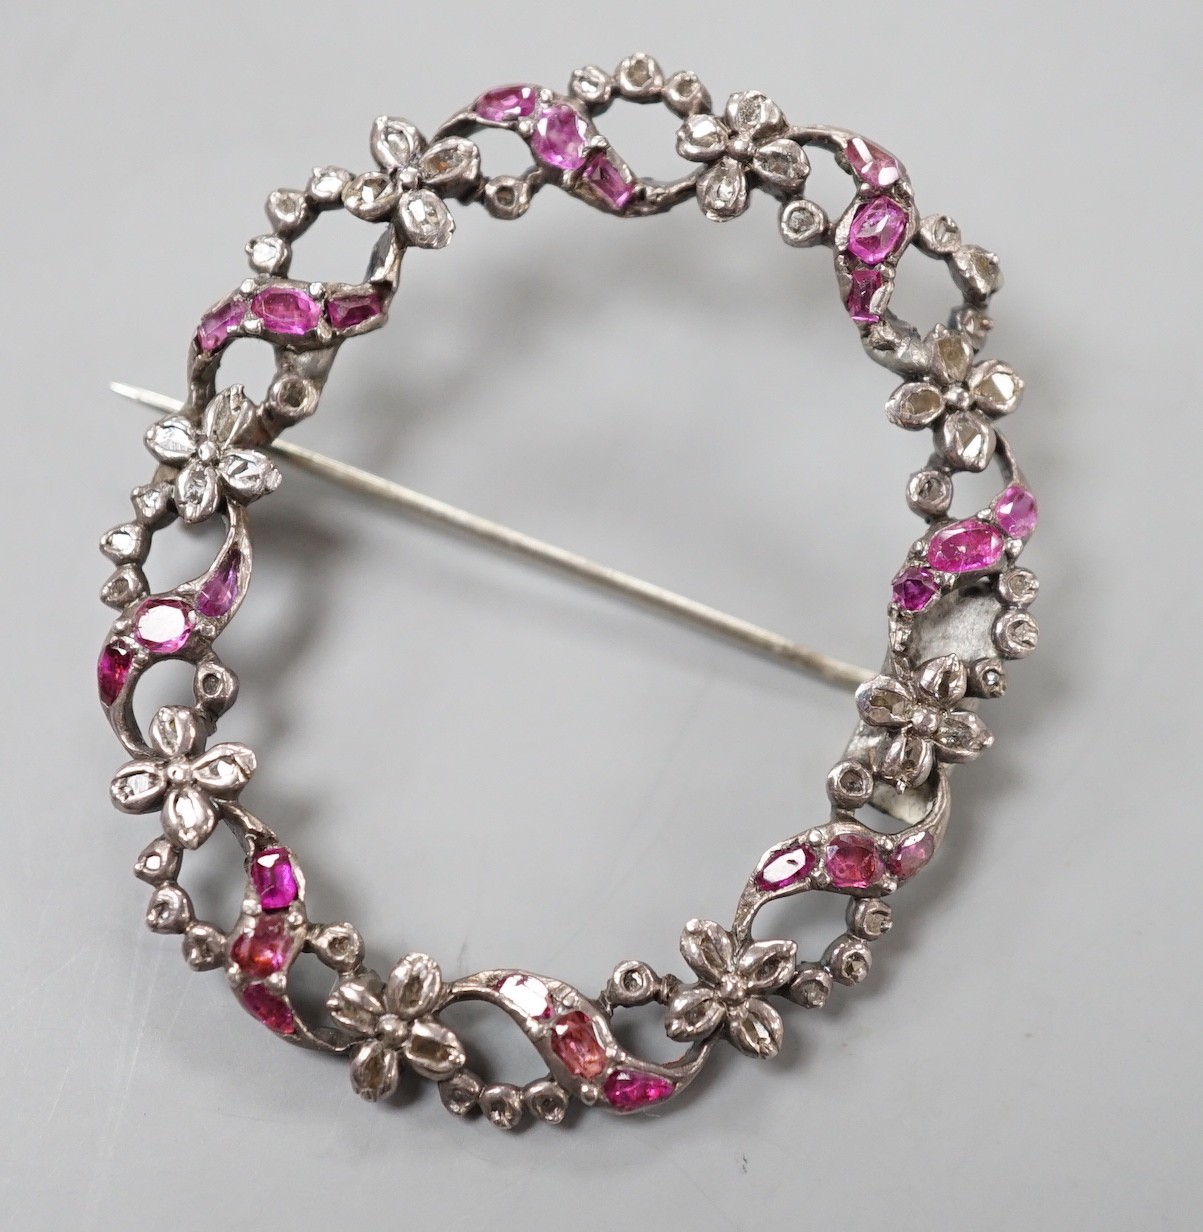 A 19th century white metal rose cut diamond and ruby set open work oval wreath brooch, 44mm.